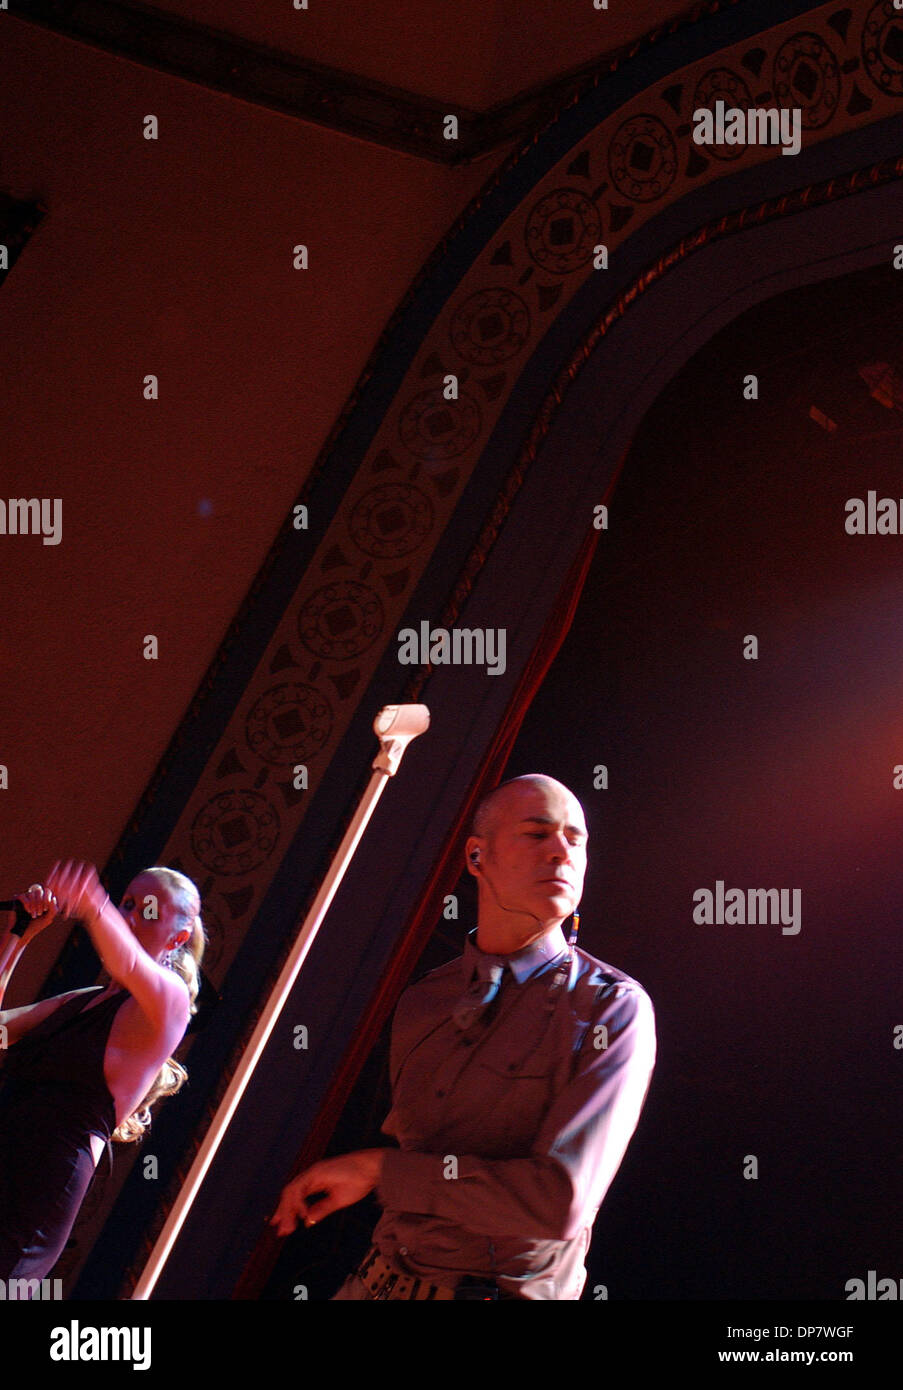 Sep 16, 2006 - Portland, Oregon, USA - Suzanne Sulley and Phil Oakey of The Human League perform in concert at the Aladdin Theater. Stock Photo